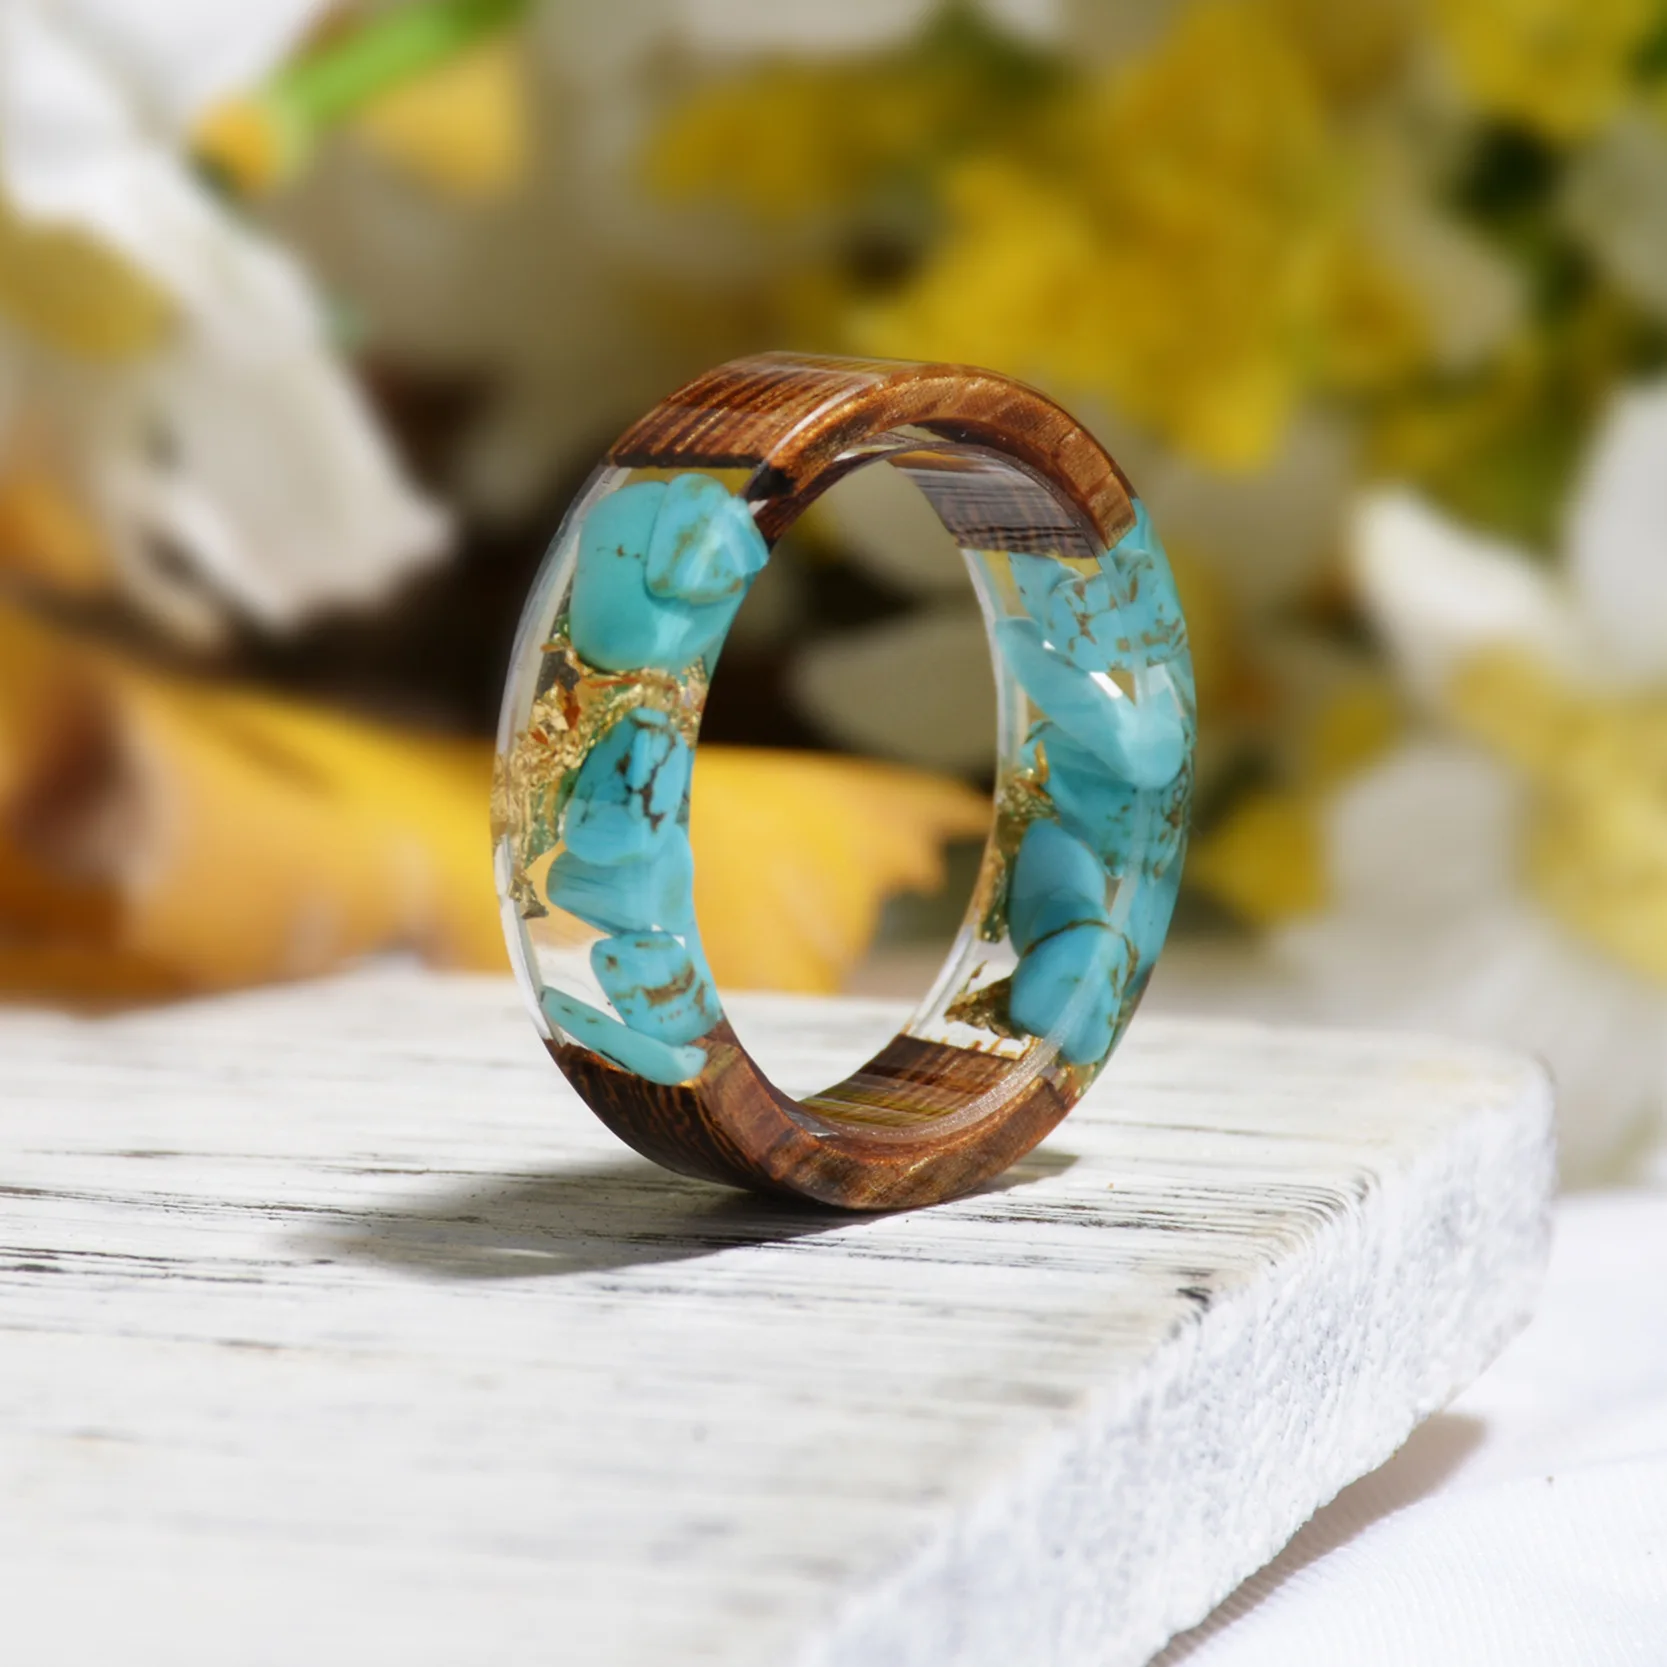 

Wood Resin Ring Transparent Epoxy Resin Ring Fashion Handmade Dried Flower Wedding Jewelry Love Ring for Women 2019 New Design